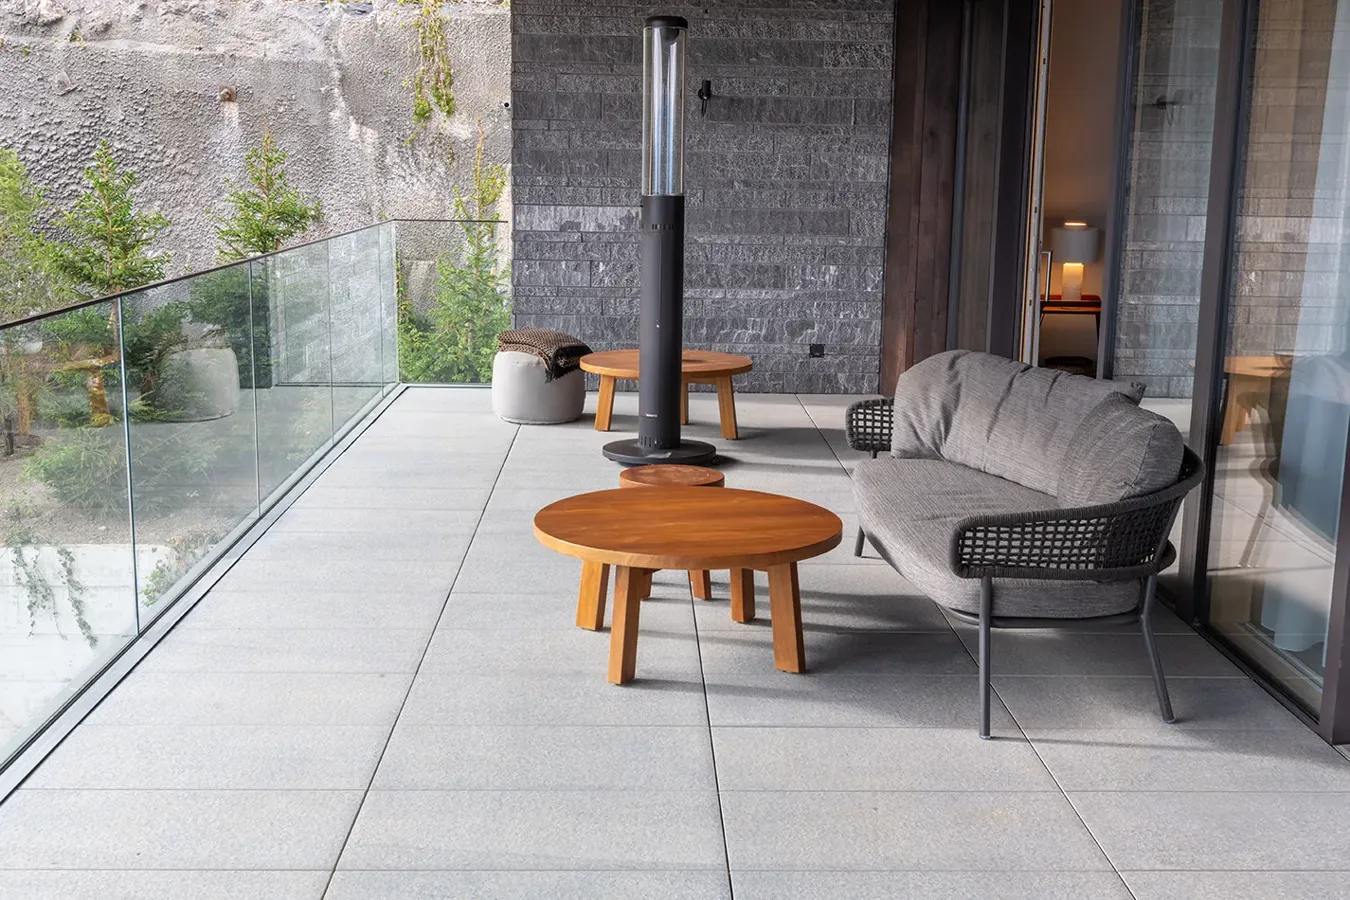 Stylish terrace featuring grey porcelain stoneware tiles, complemented by fabric and wooden outdoor furniture, encased by stone walls and glass.